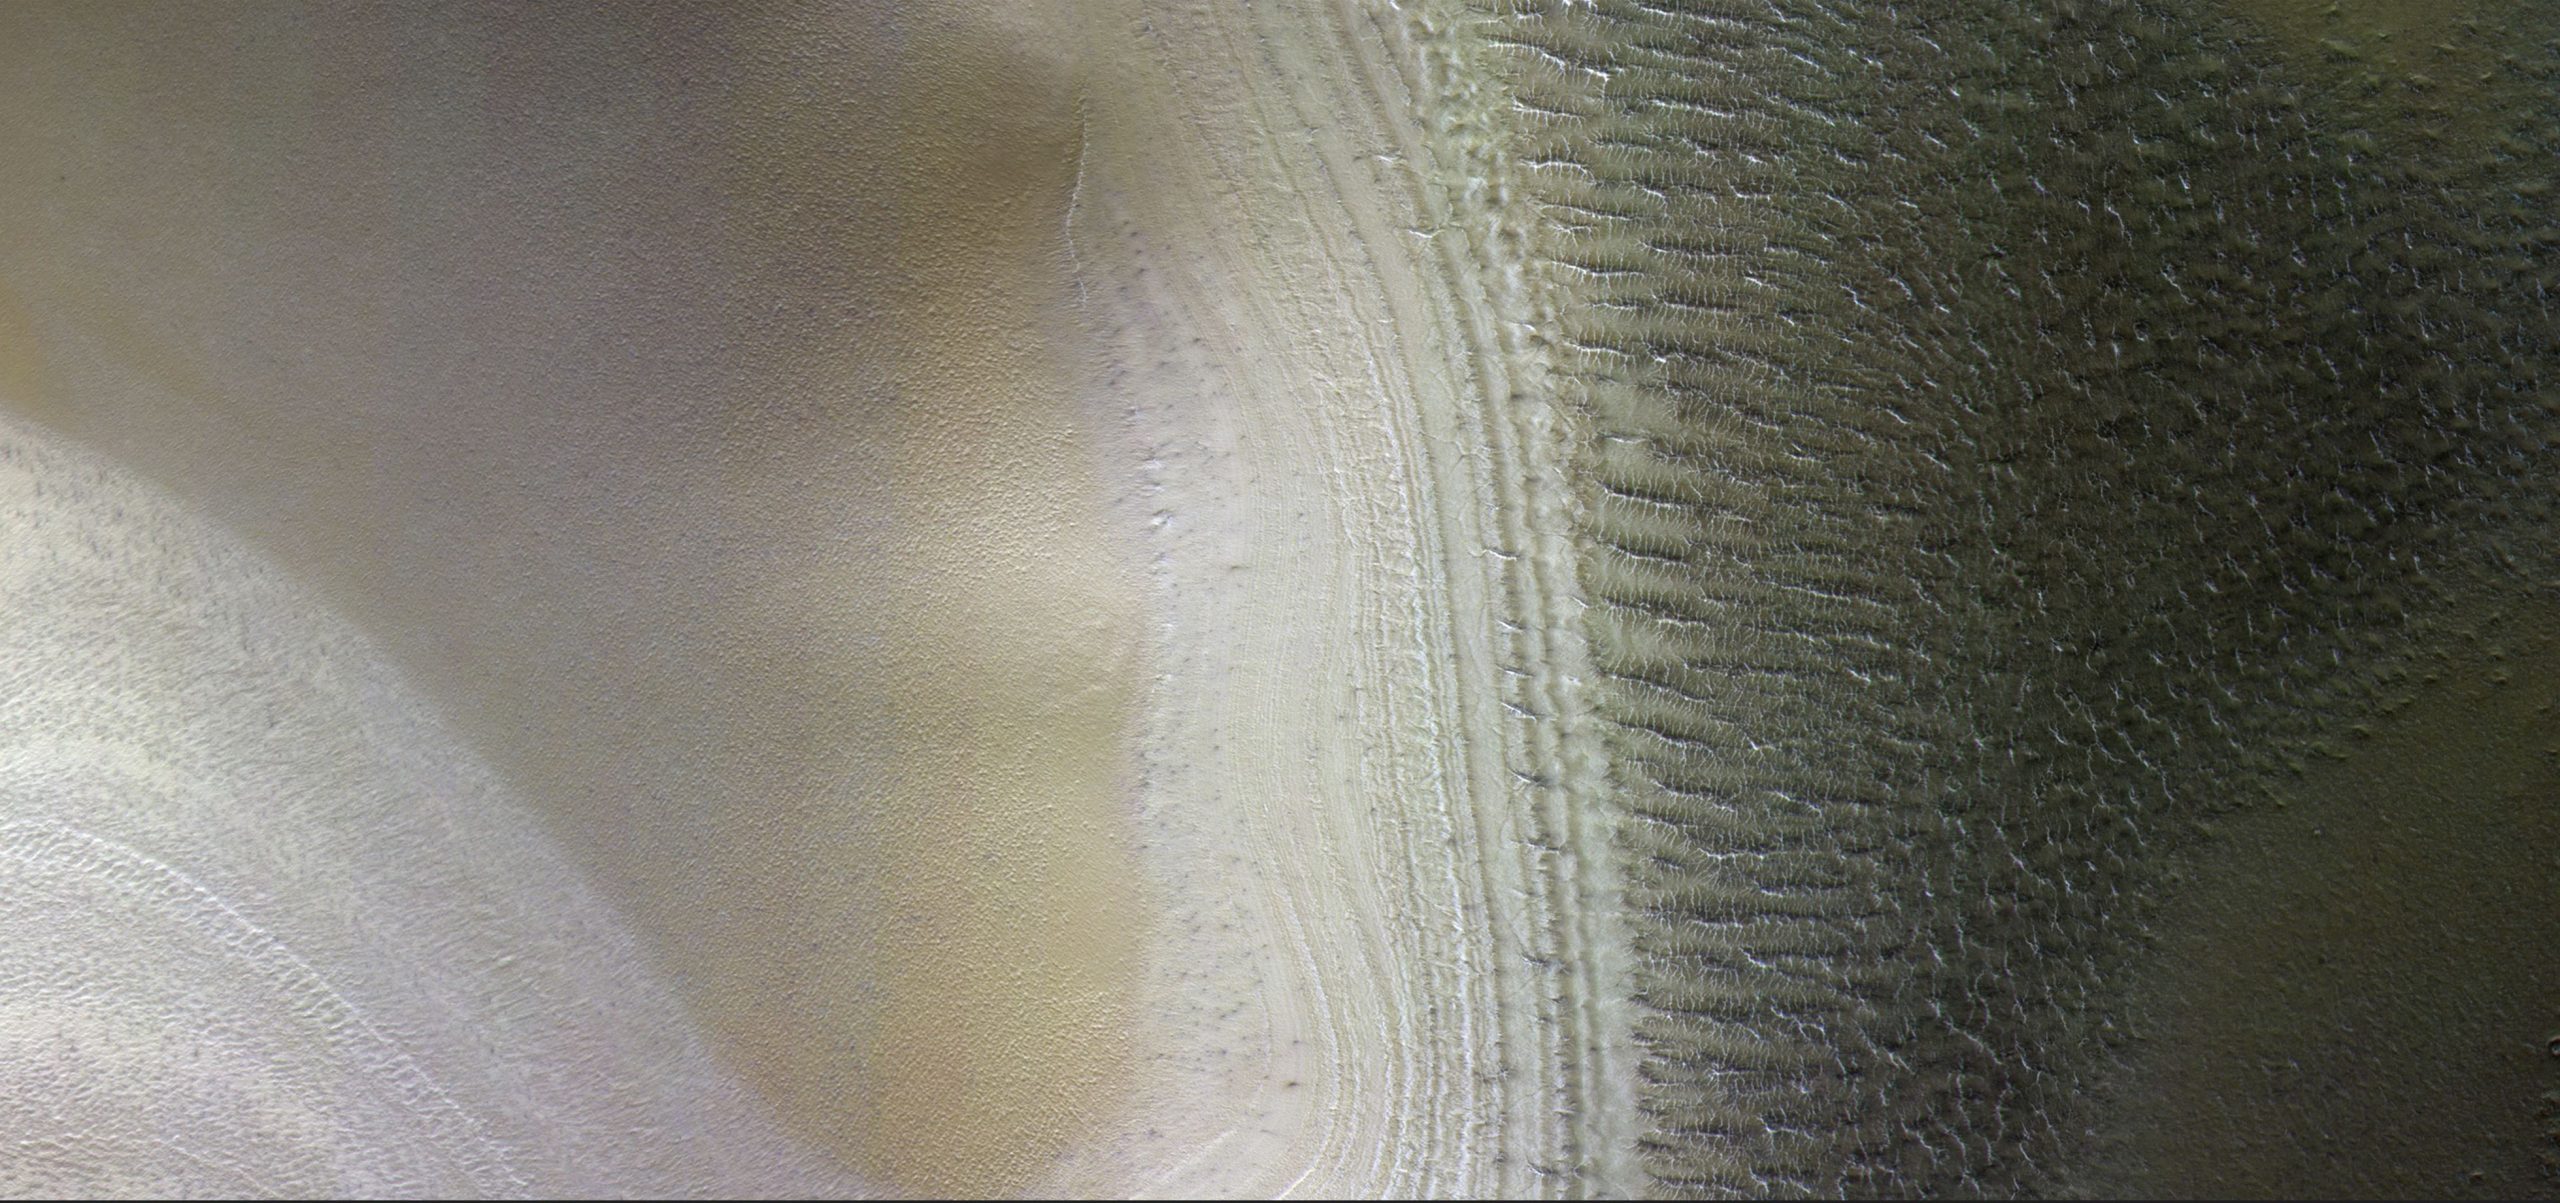 Layered deposits at the south pole of Mars. ESA.